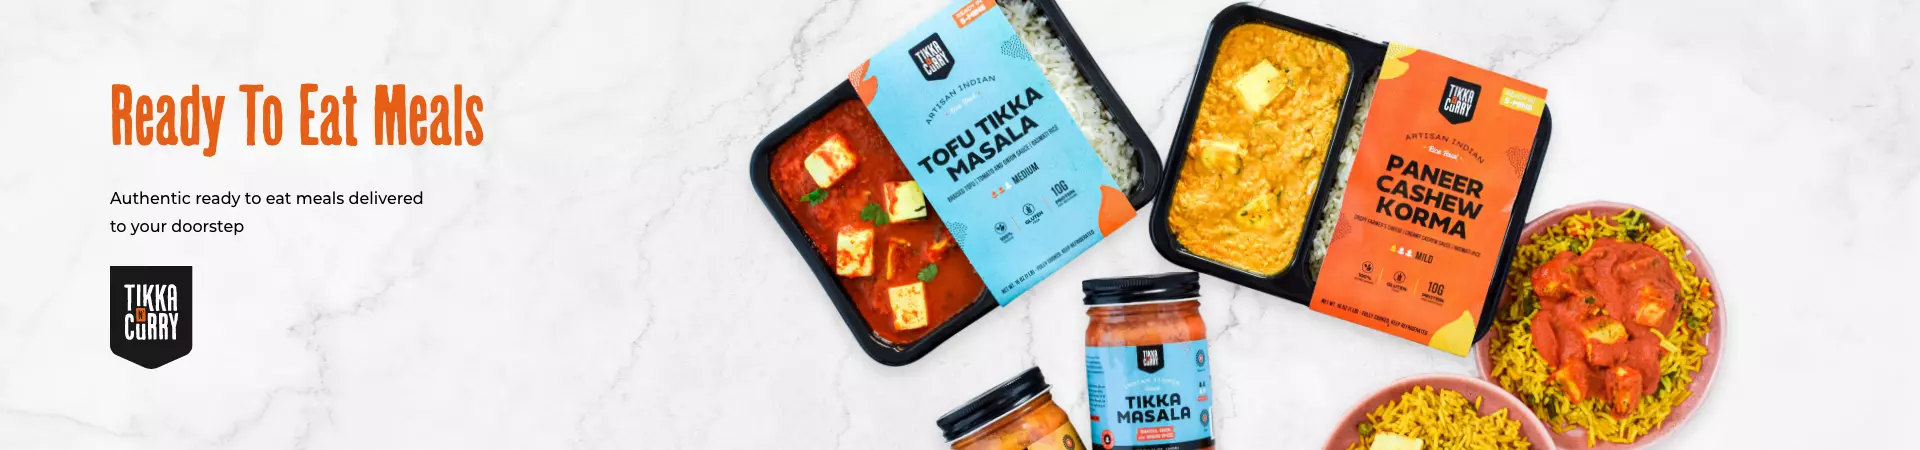 Indian Meal Kit Subscription